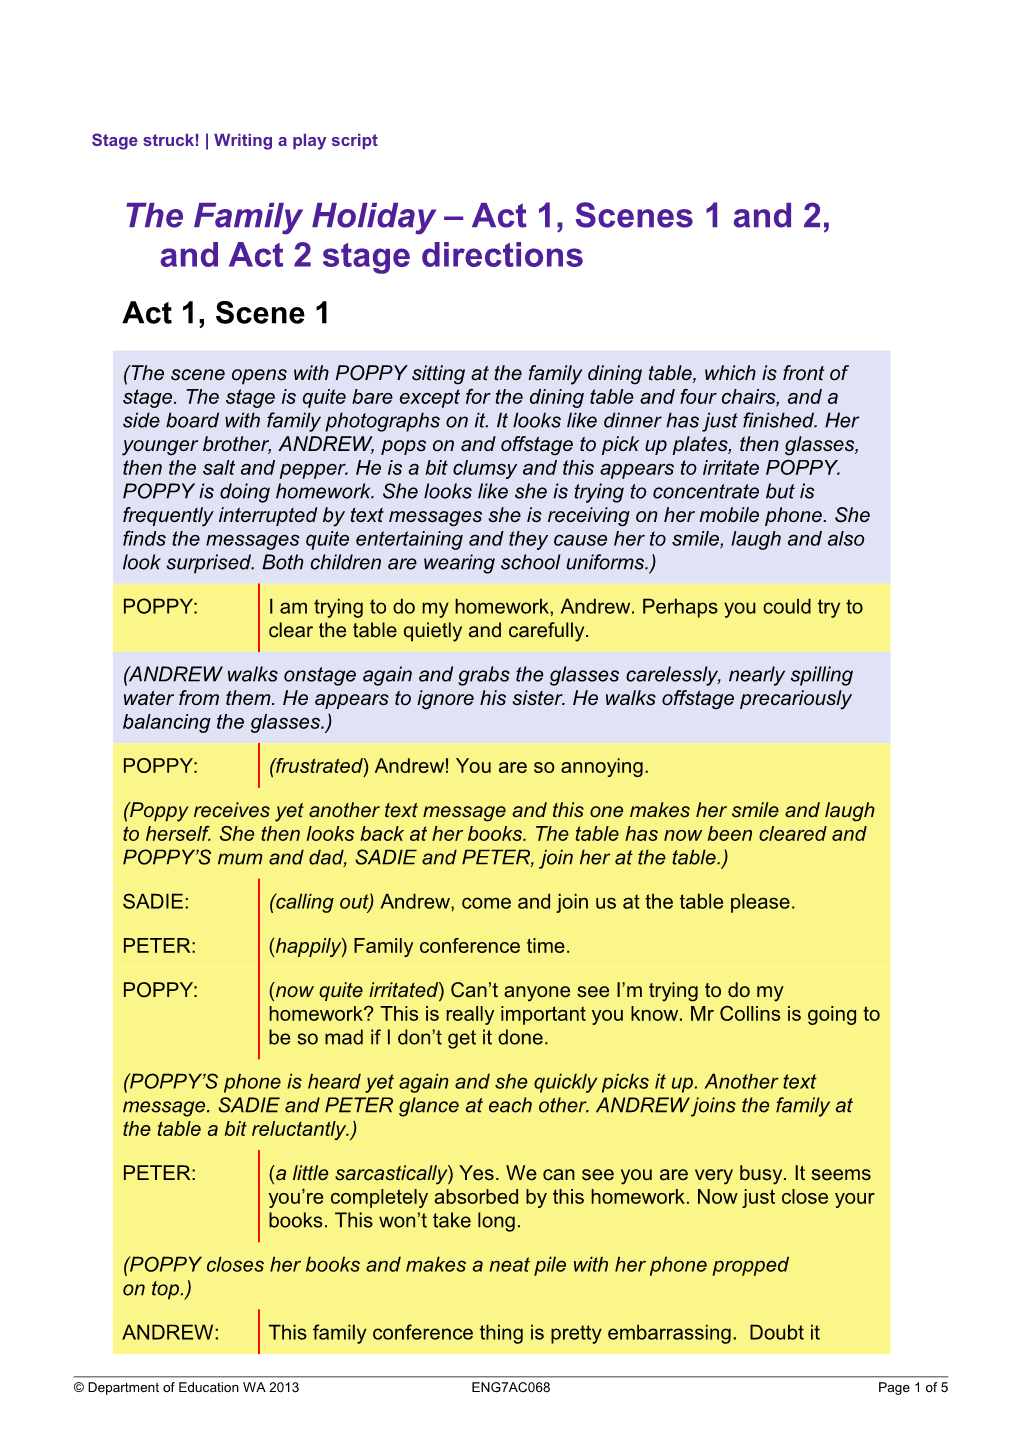 The Family Holiday Act 1, Scenes 1 and 2, and Act 2 Stage Directions